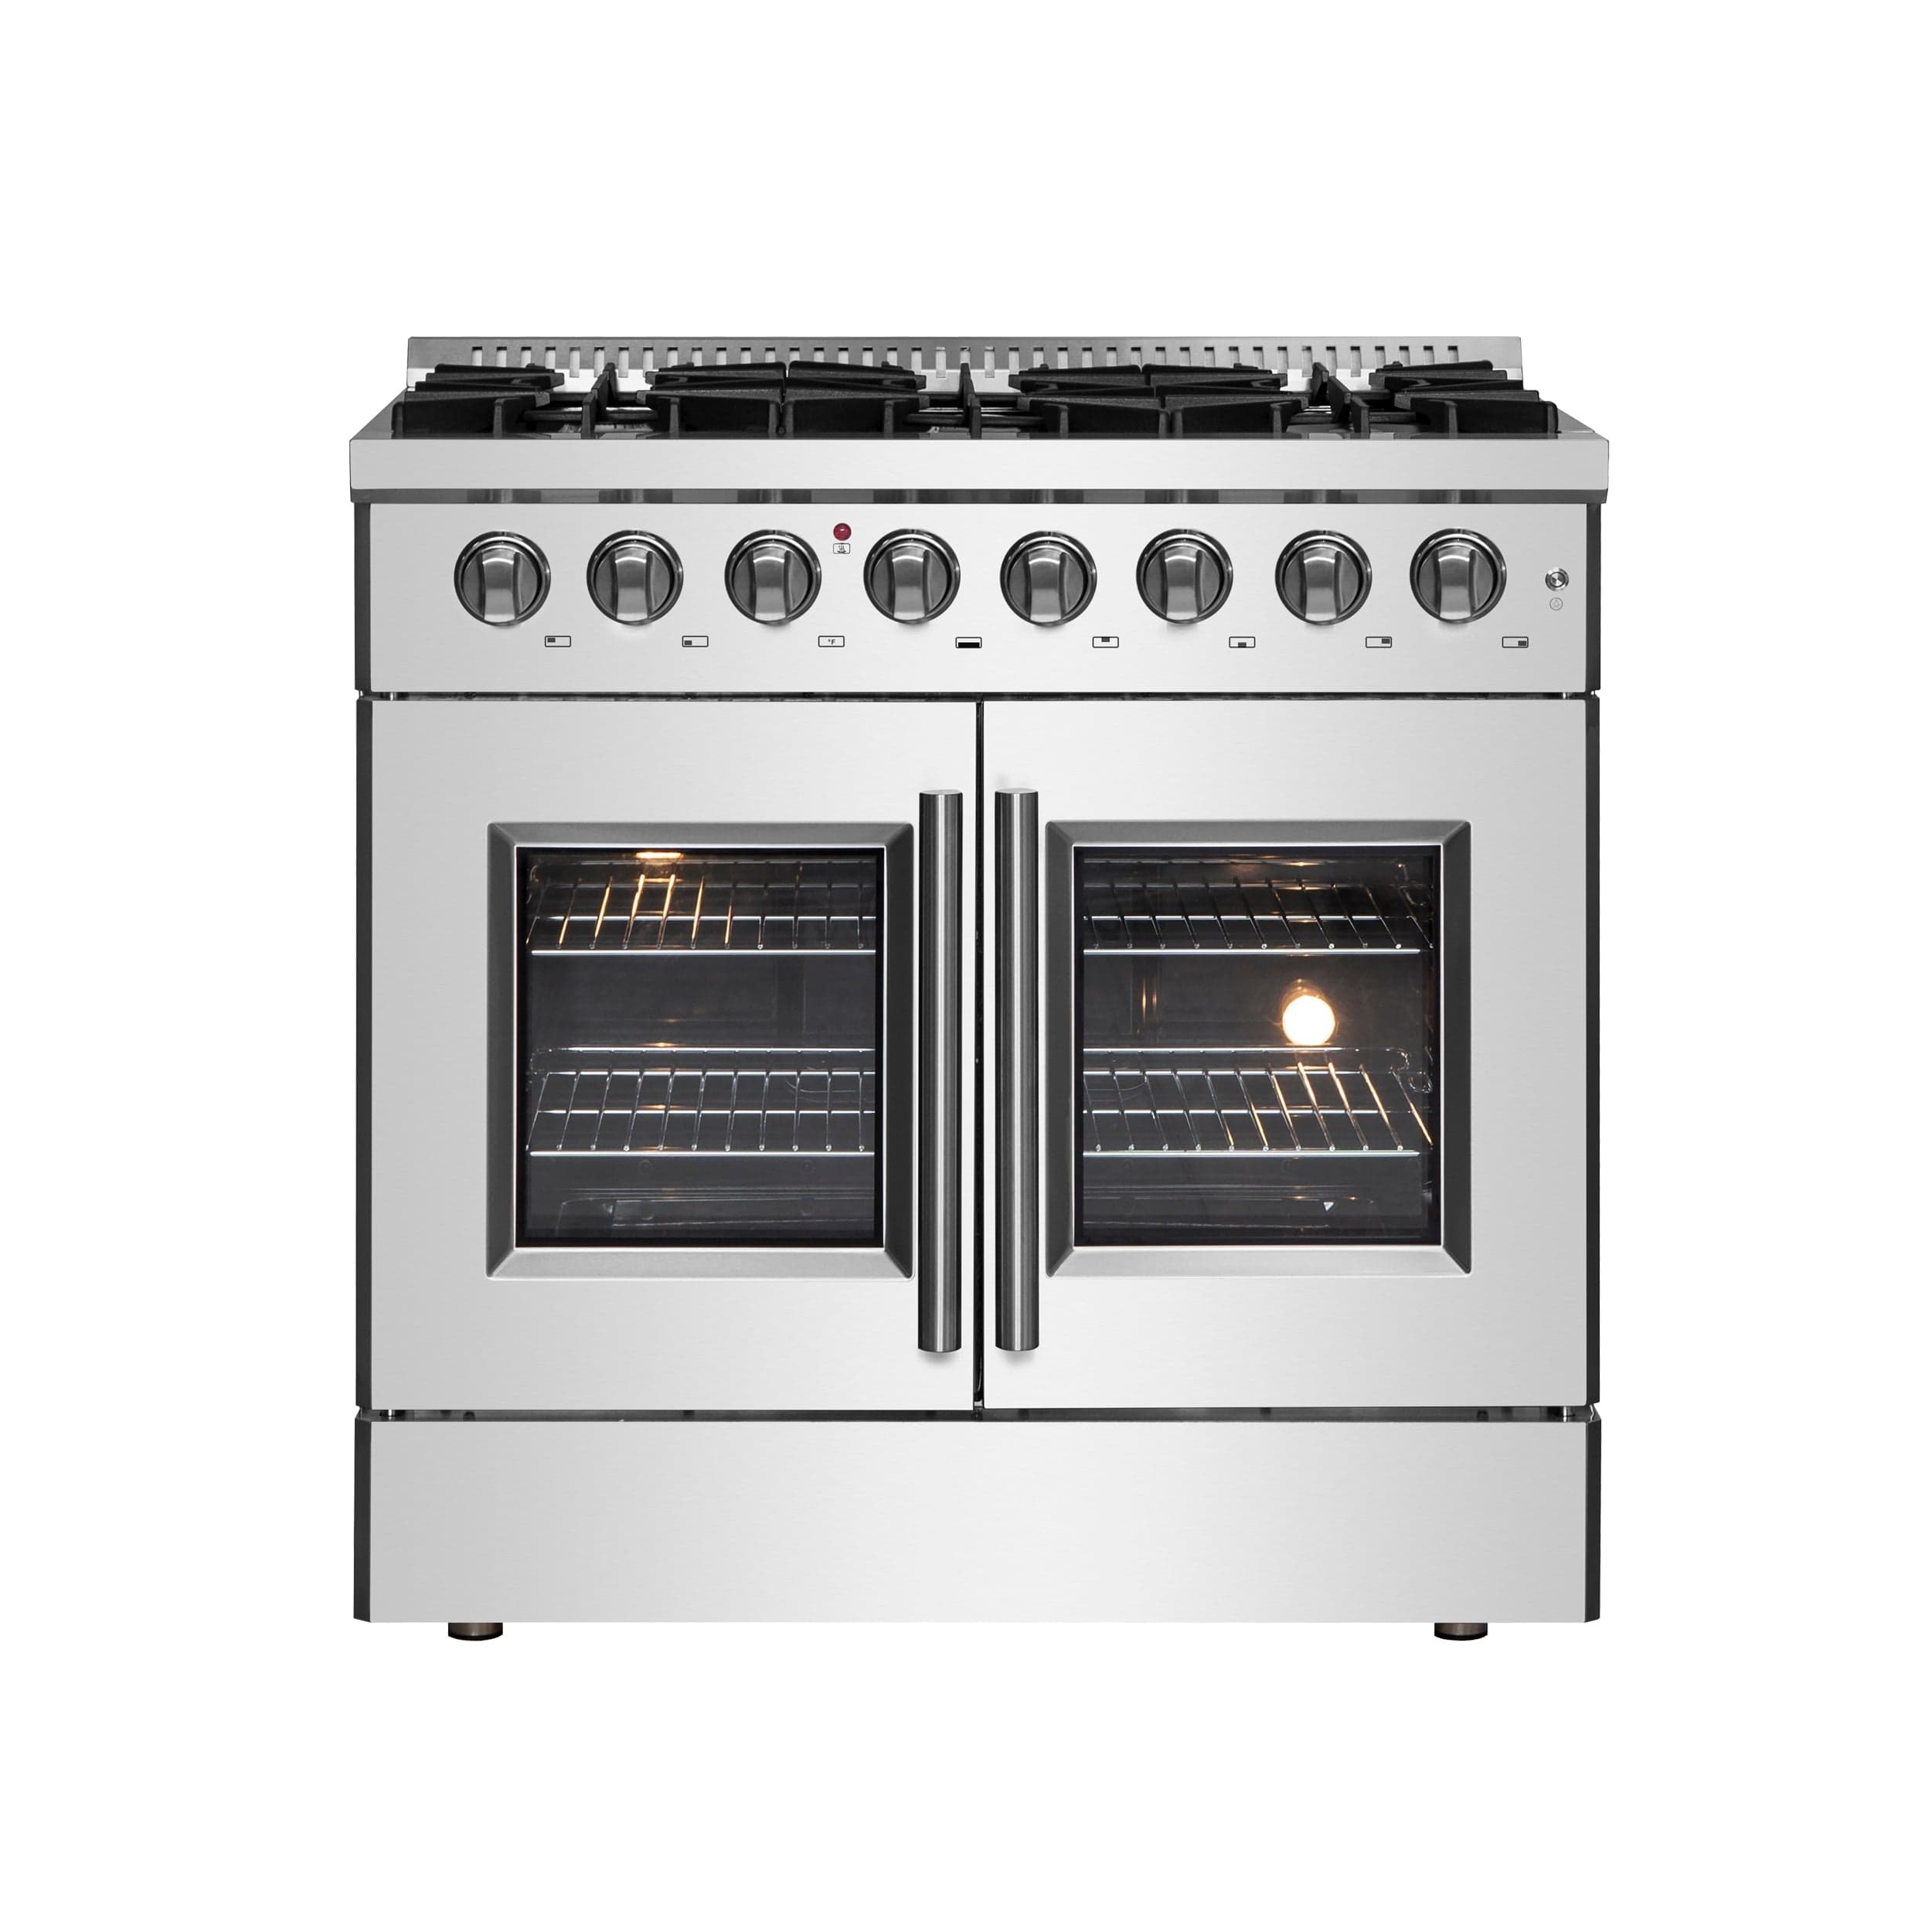 Forno Galiano 36" Gas Burner, Electric Oven Range With French Door in Stainless Steel, FFSGS6356-36 Ranges FFSGS6356-36 Luxury Appliances Direct